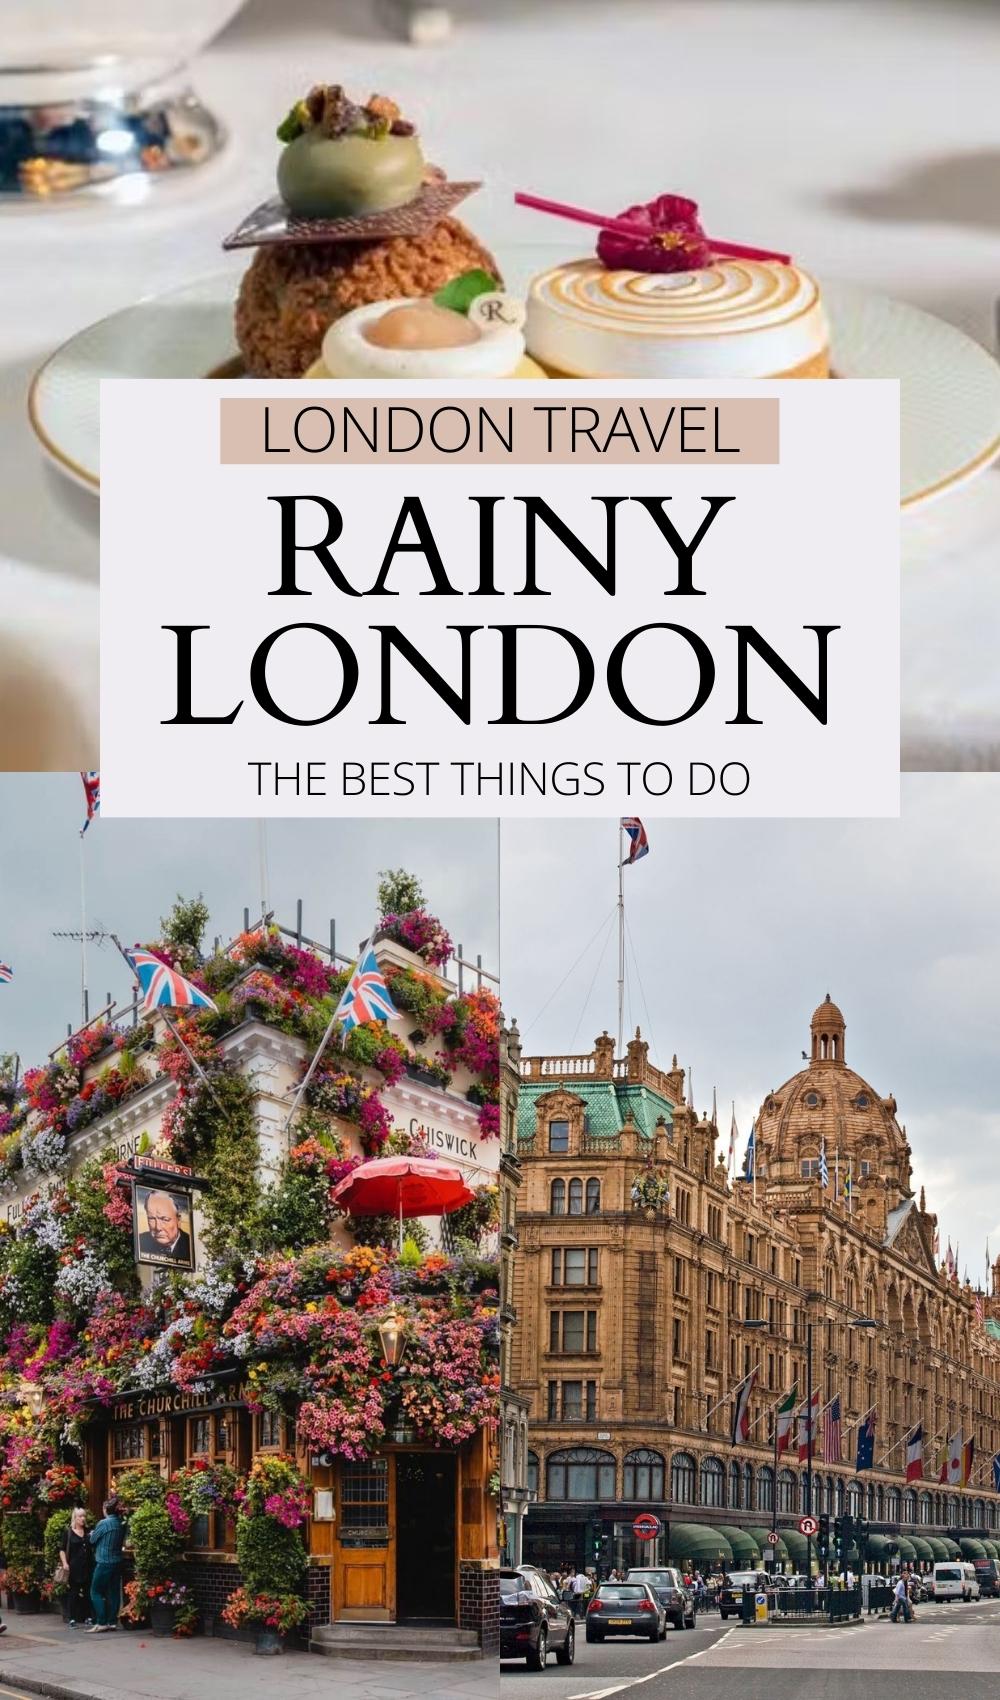 best things to do in london when it rains - free things to do in london when it's raining - how to spend a rainy day in london - cheap things to do in london for couples - traveling to london for the first time - london travel blog - london travel guide - what to do in london on a budget - how to live in london on a budget - best activities in london when it rains - what to do in london in winter - how to spend rainy days in london - best places to visit in london - best hidden gems in london